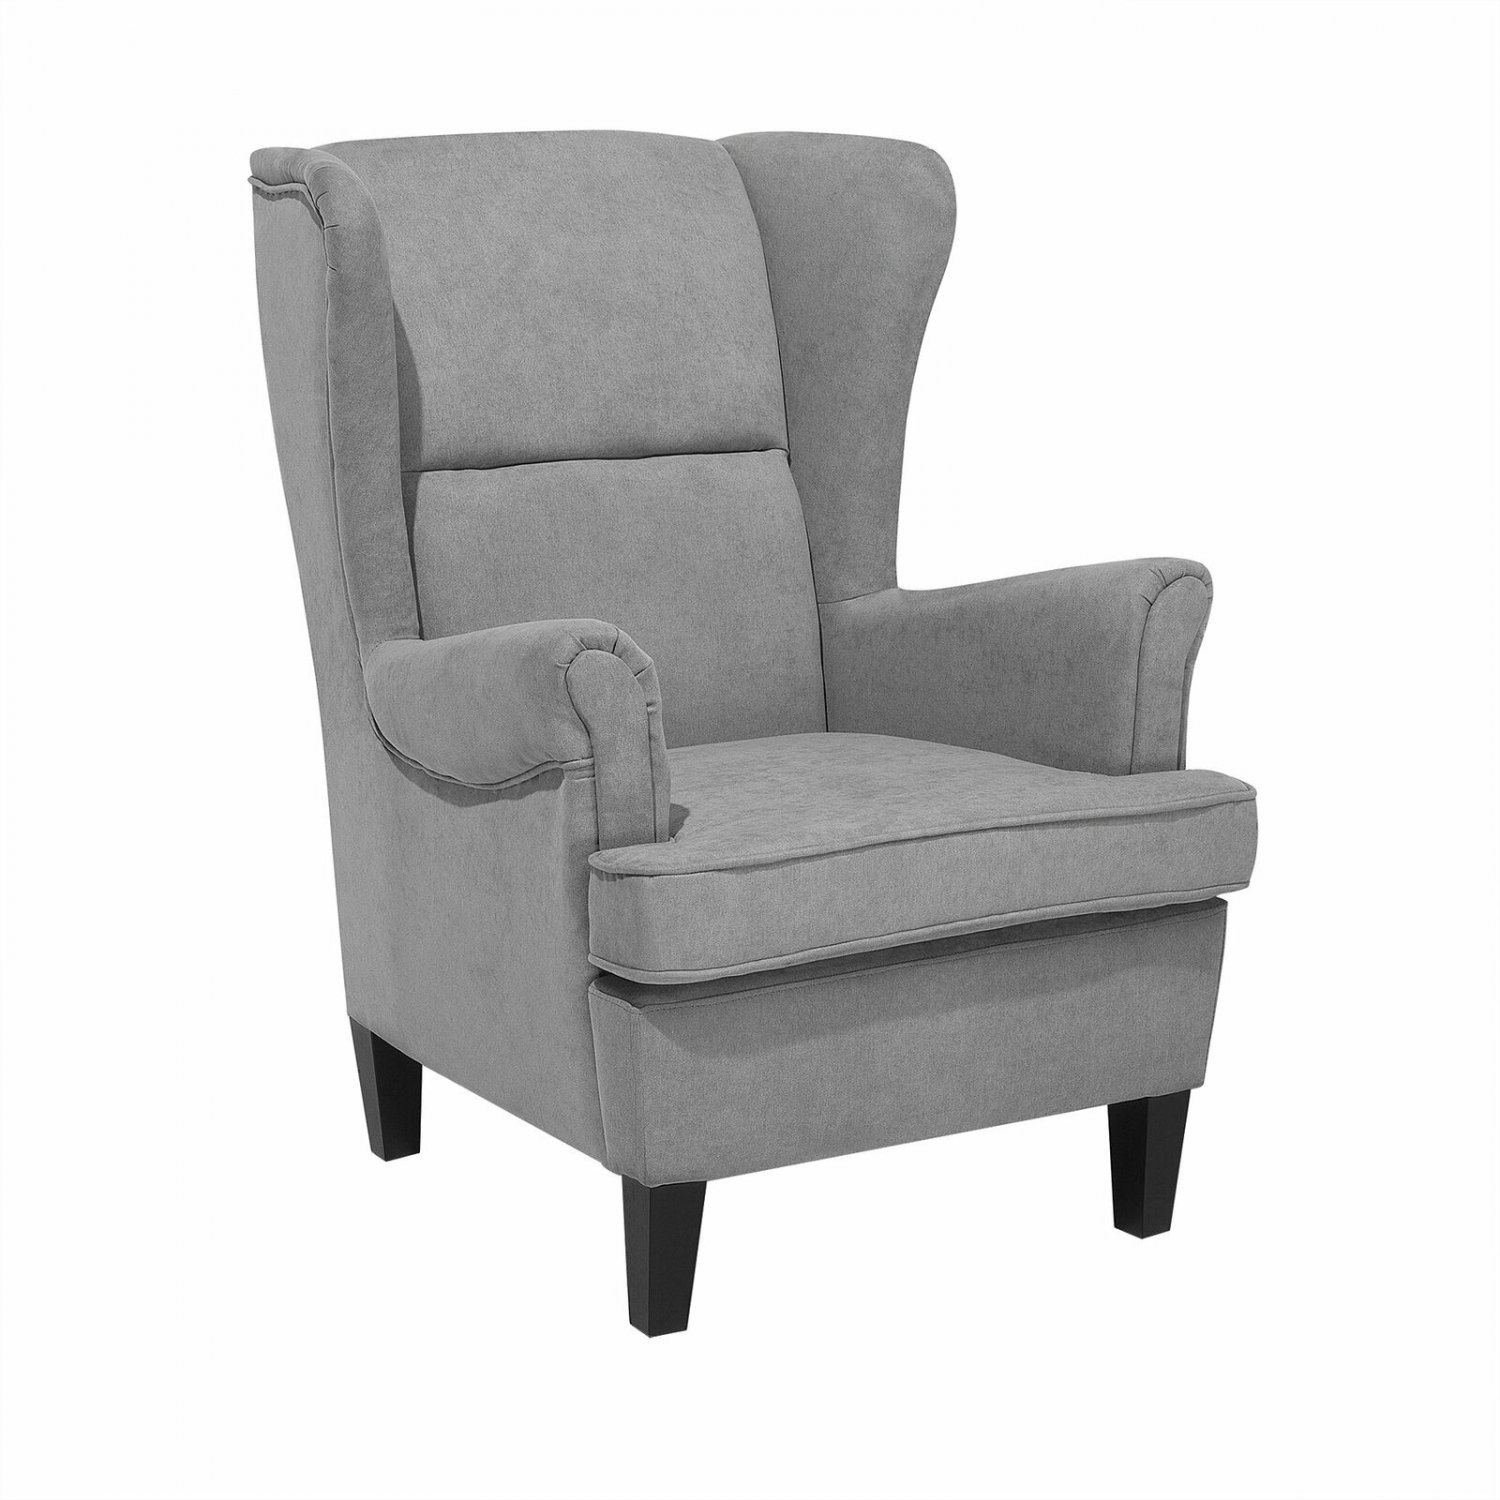 Classic Wingback Chair Upholstered High Back Gray Fabric Living Room Abson